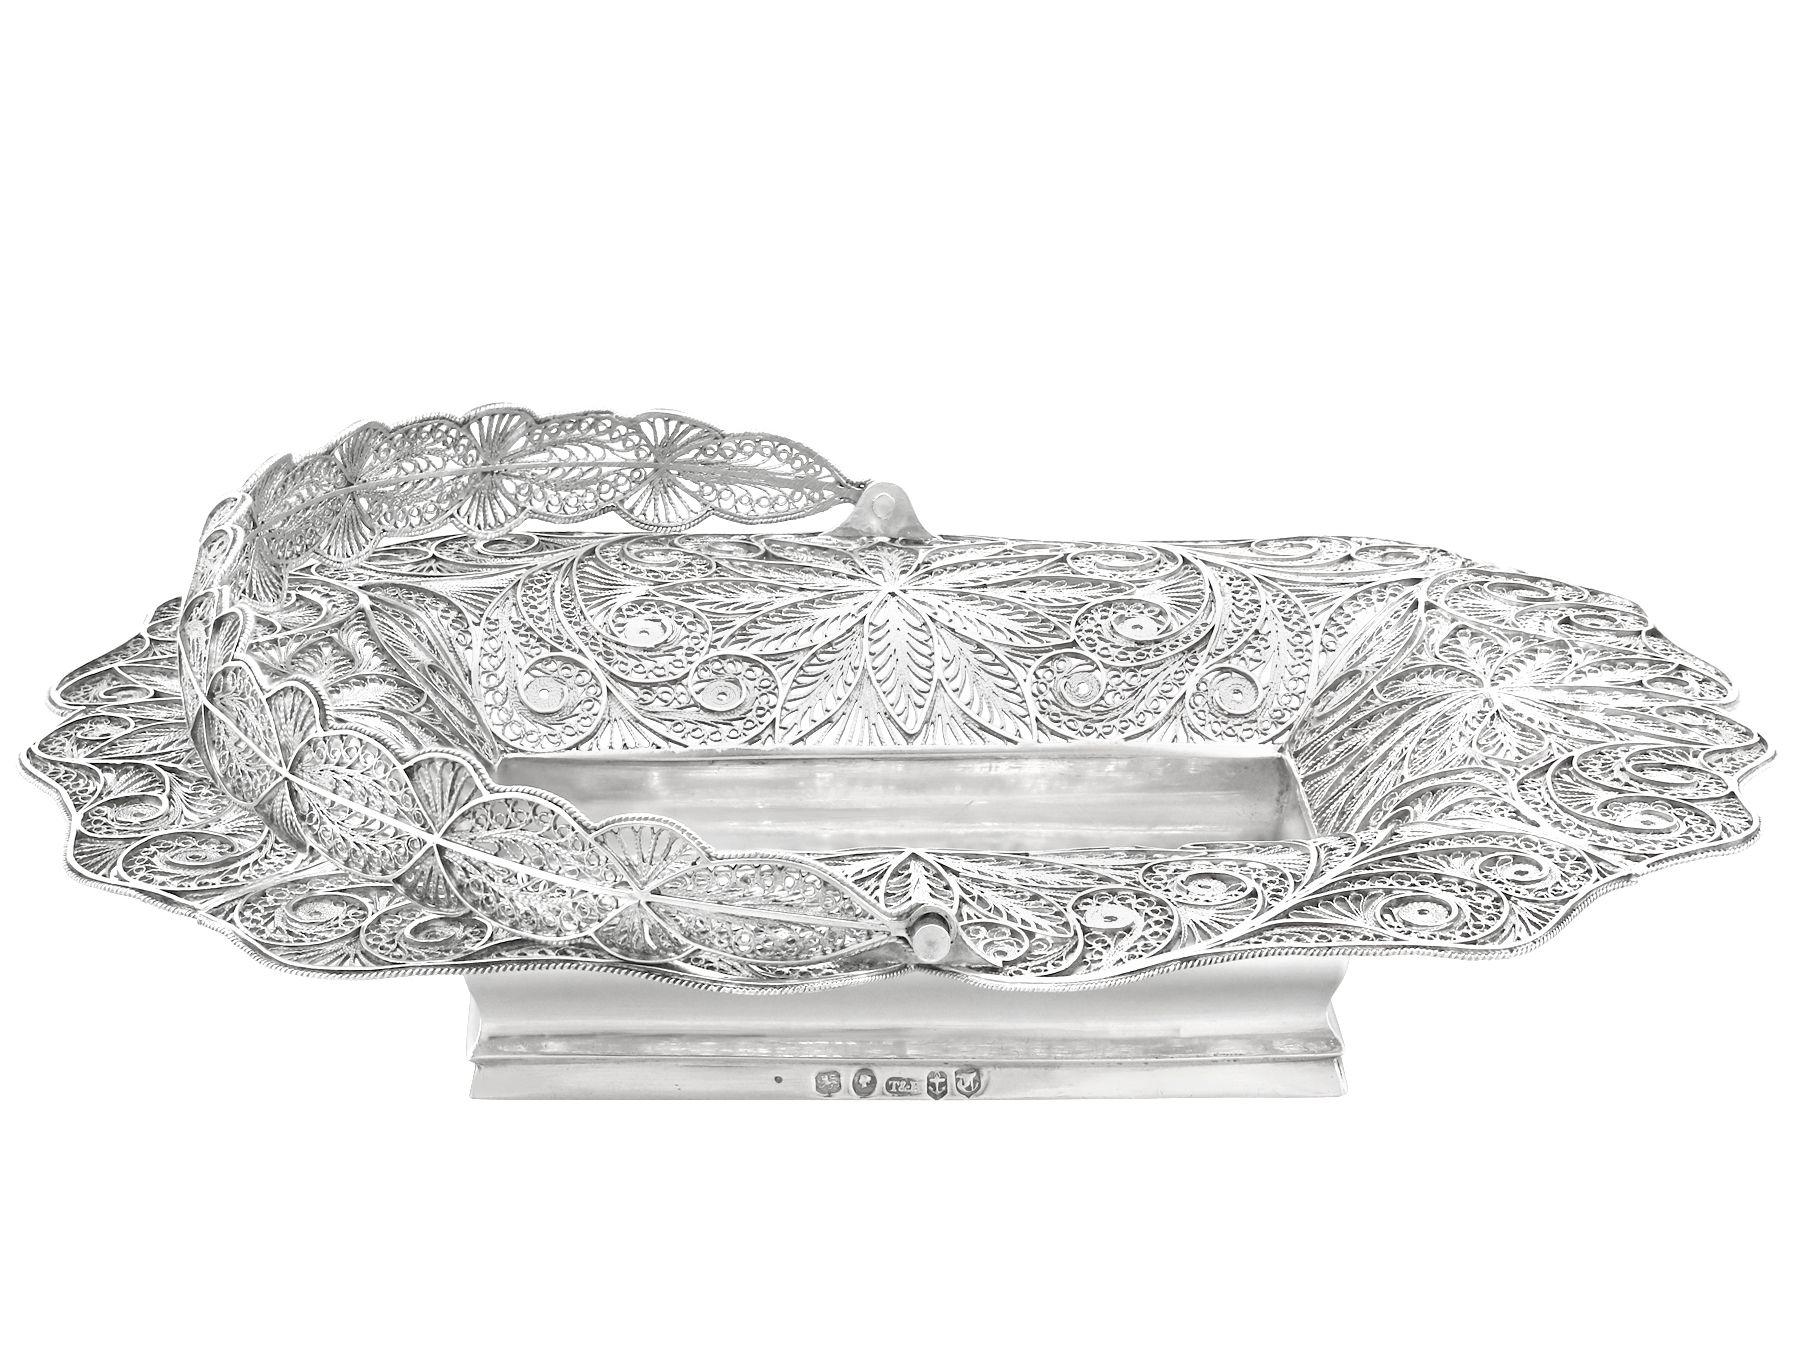 An exceptional, fine and impressive and rare antique Victorian English sterling silver swing handled bon bon basket; an addition to our ornamental silverware collection.

This fine antique Victorian sterling silver basket has an oval shaped form